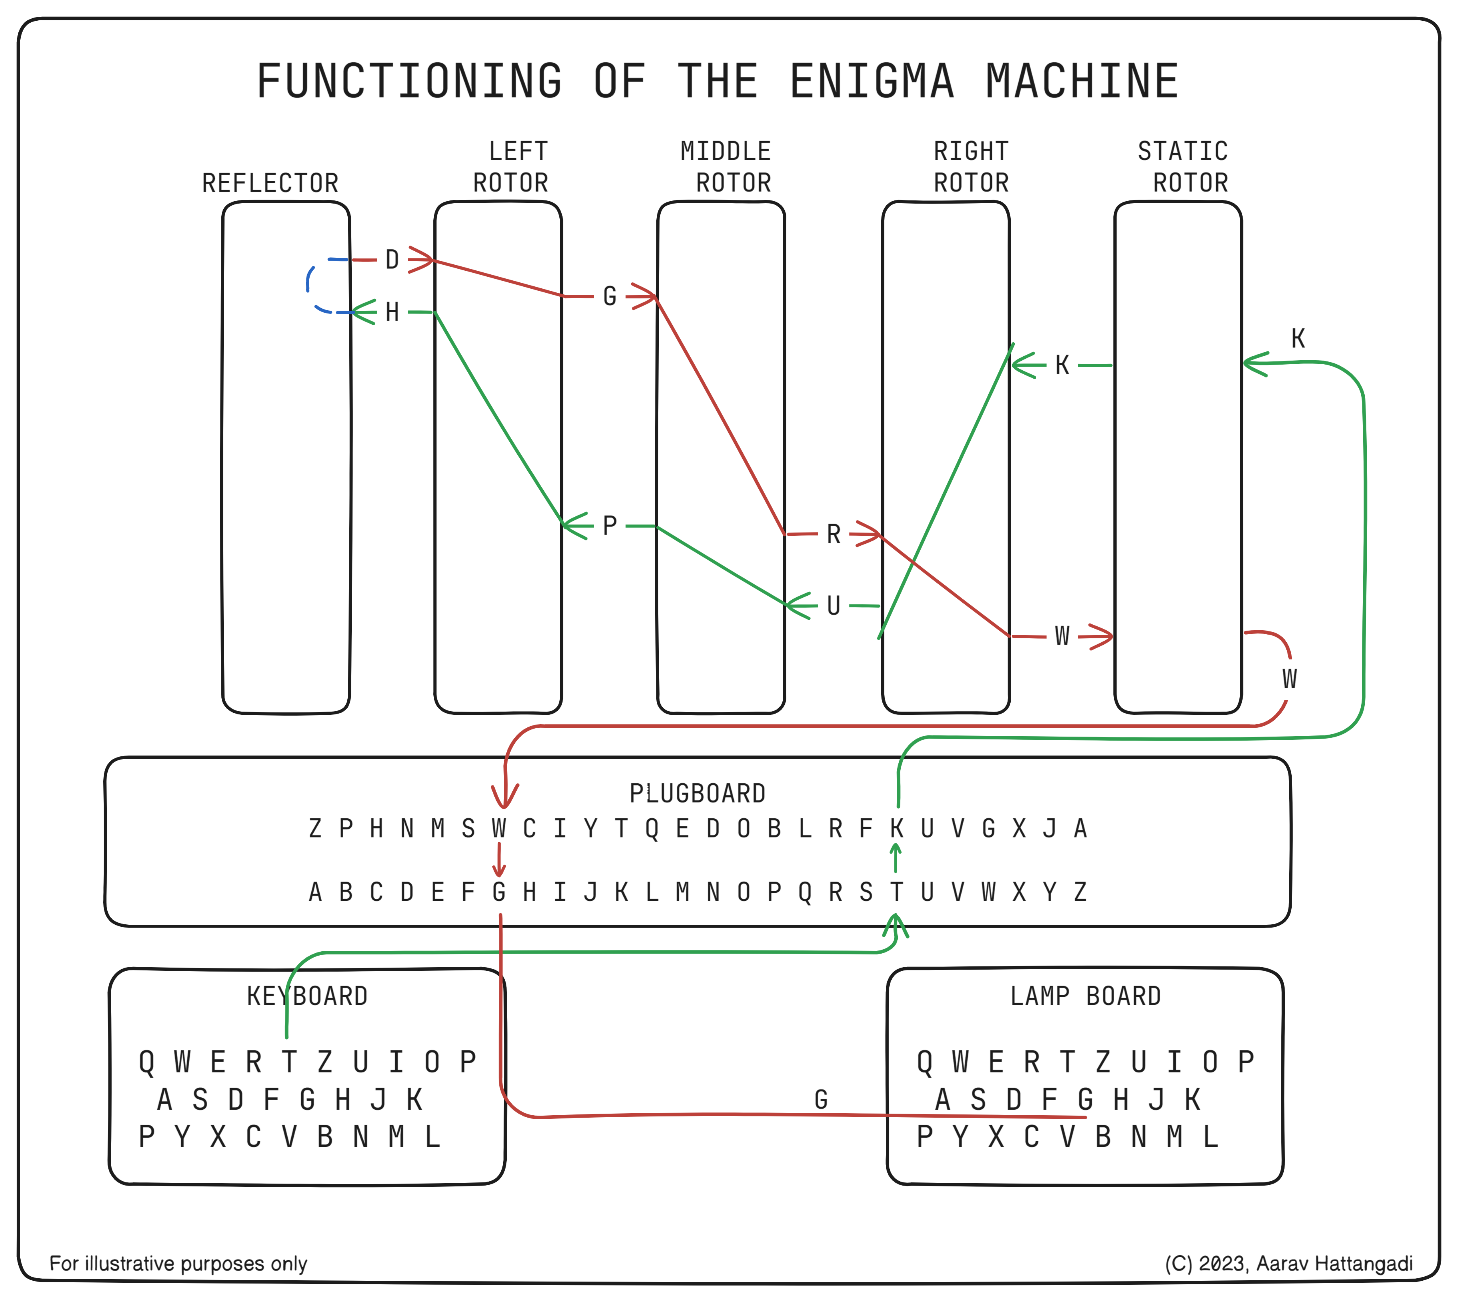 An image showing how the signals passed through an enigma machine